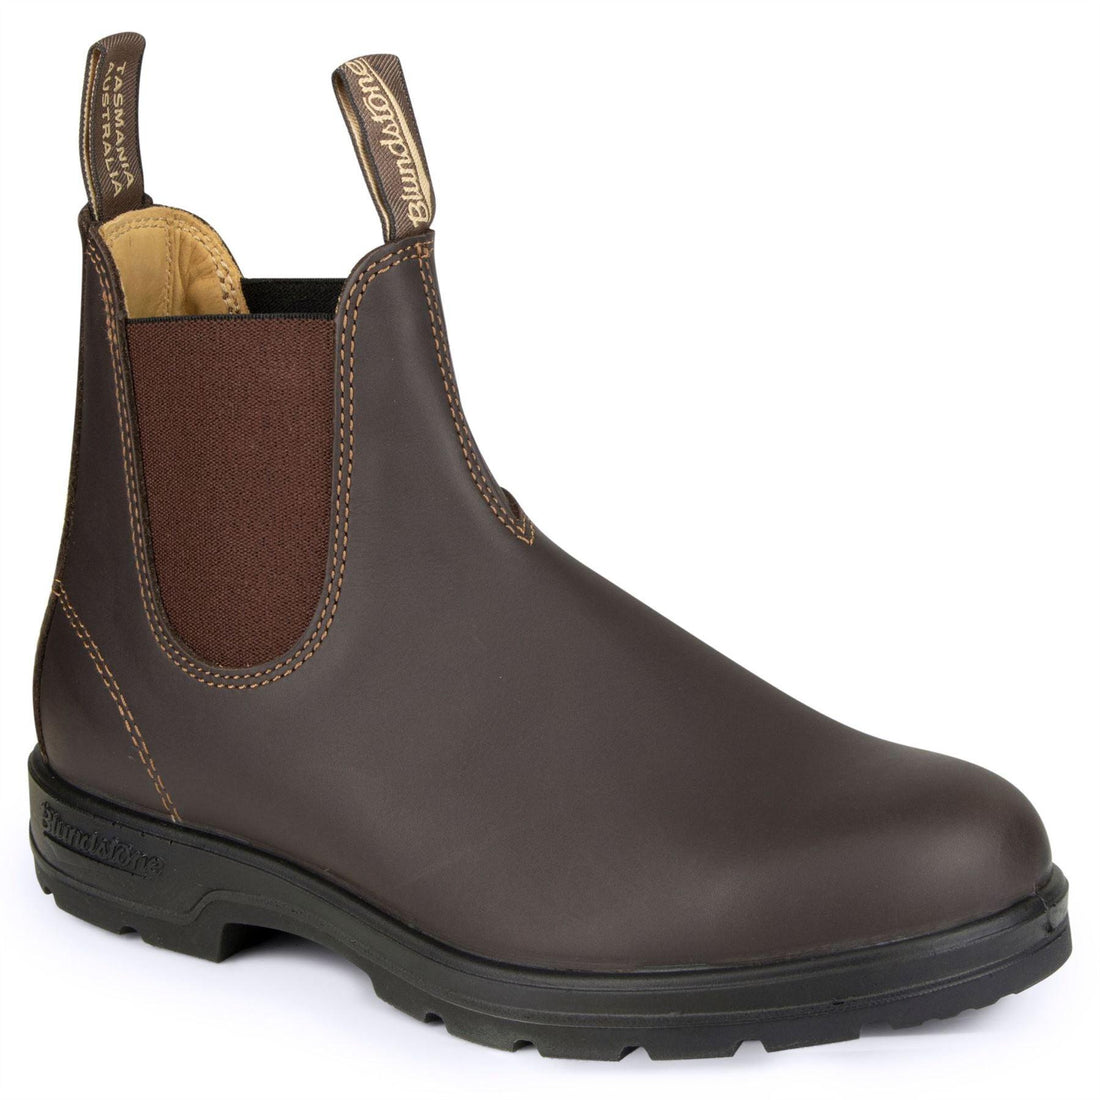 Blundstone 550 Walnut Brown Leather Australian Chelsea Ankle Boots - Knighthood Store